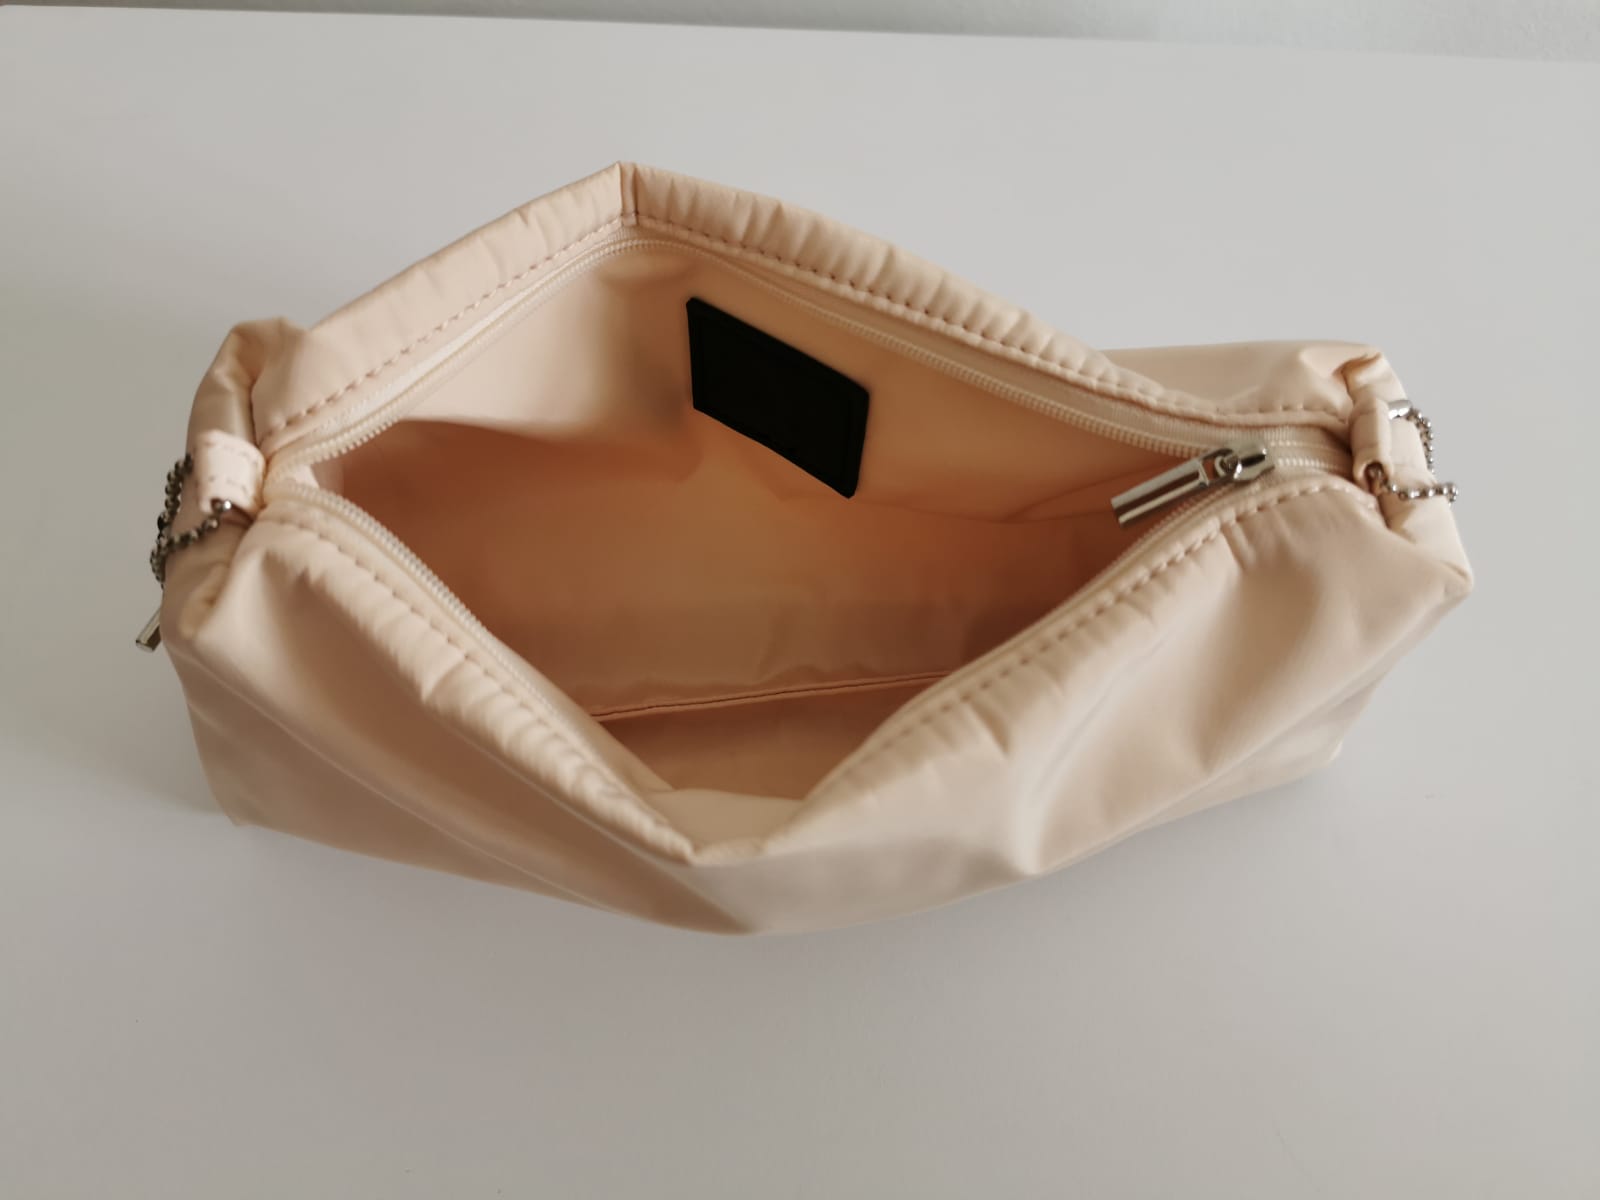 Weave leather bag with beige pouch